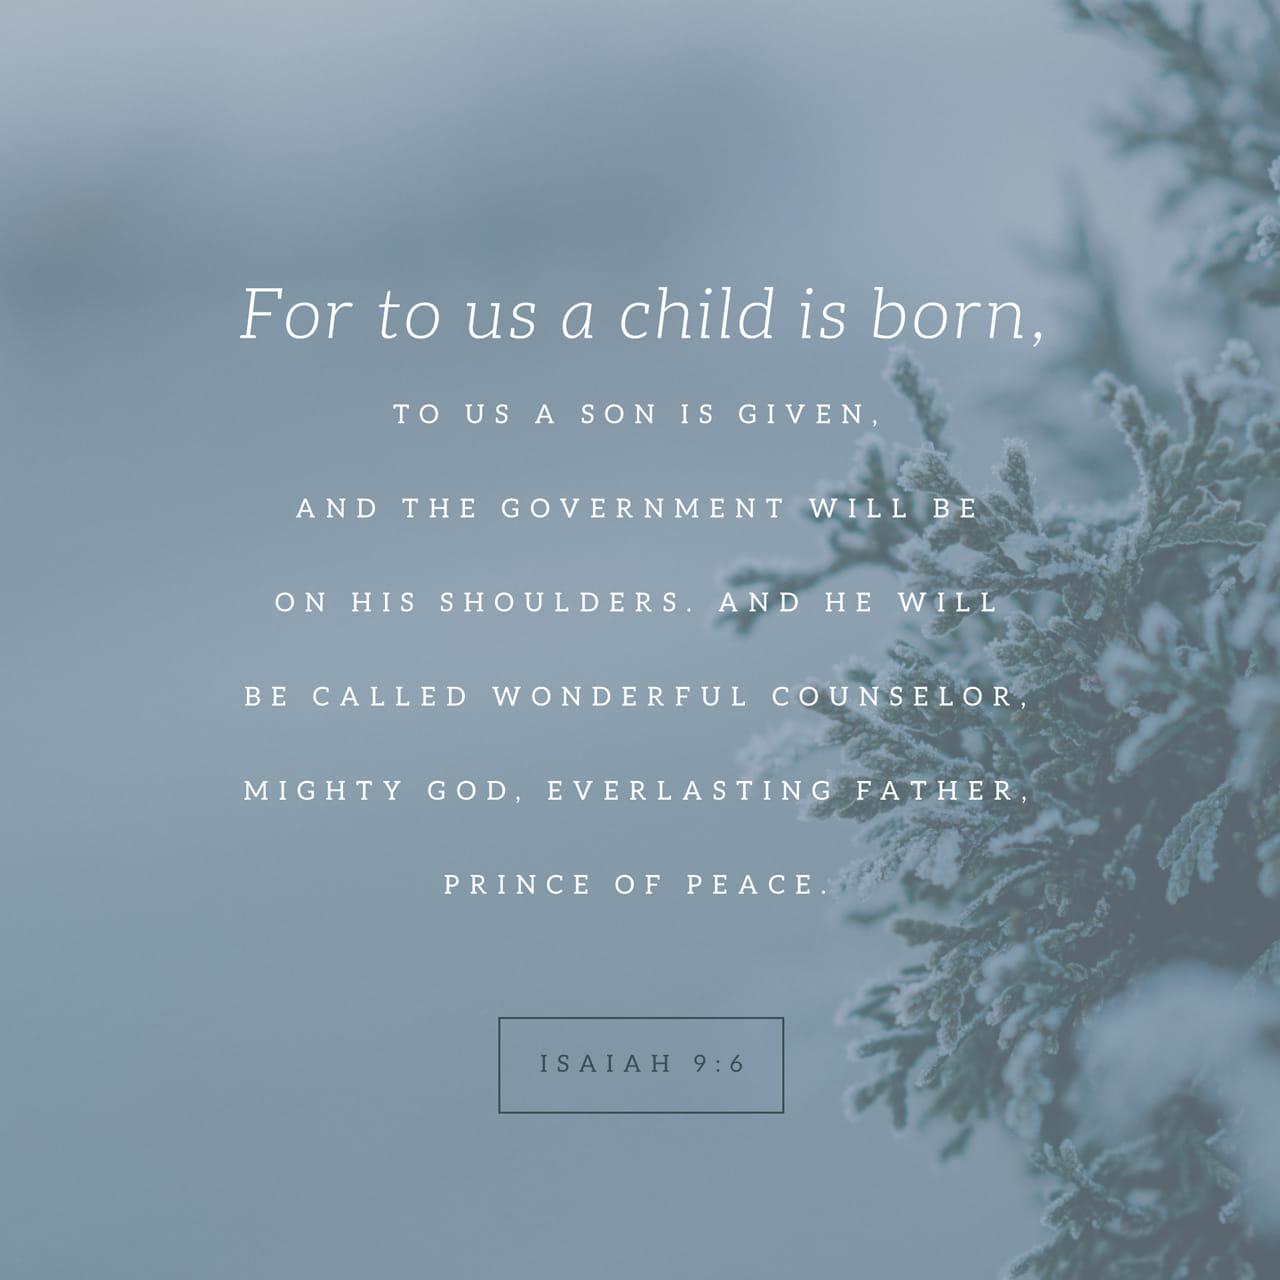 Bible Verse of the Day - day 83 - image 25557 (Isaiah 9:1-7)